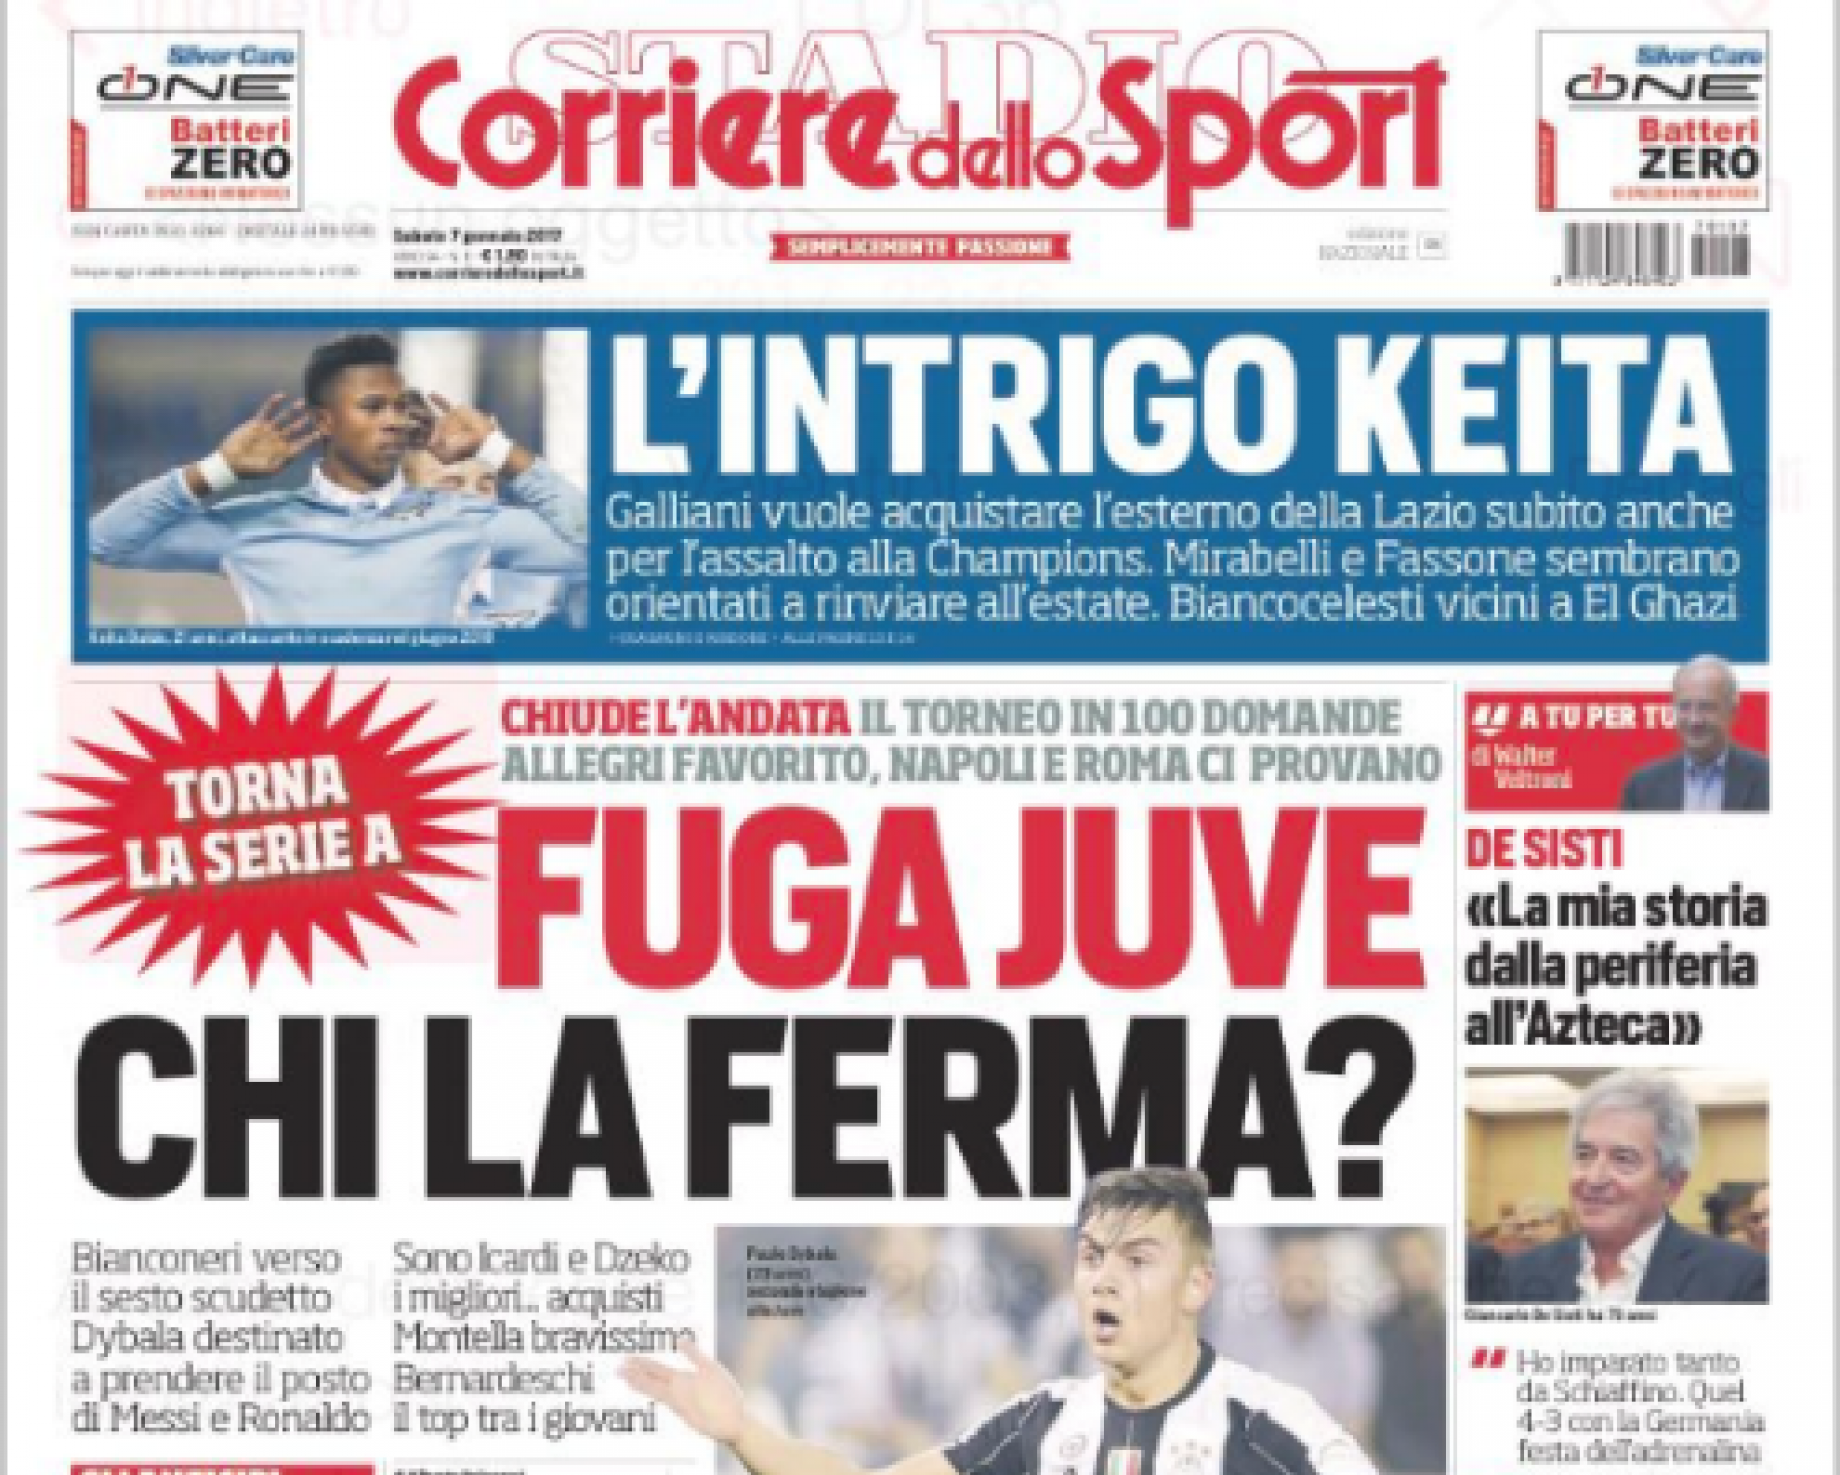 corriere.png